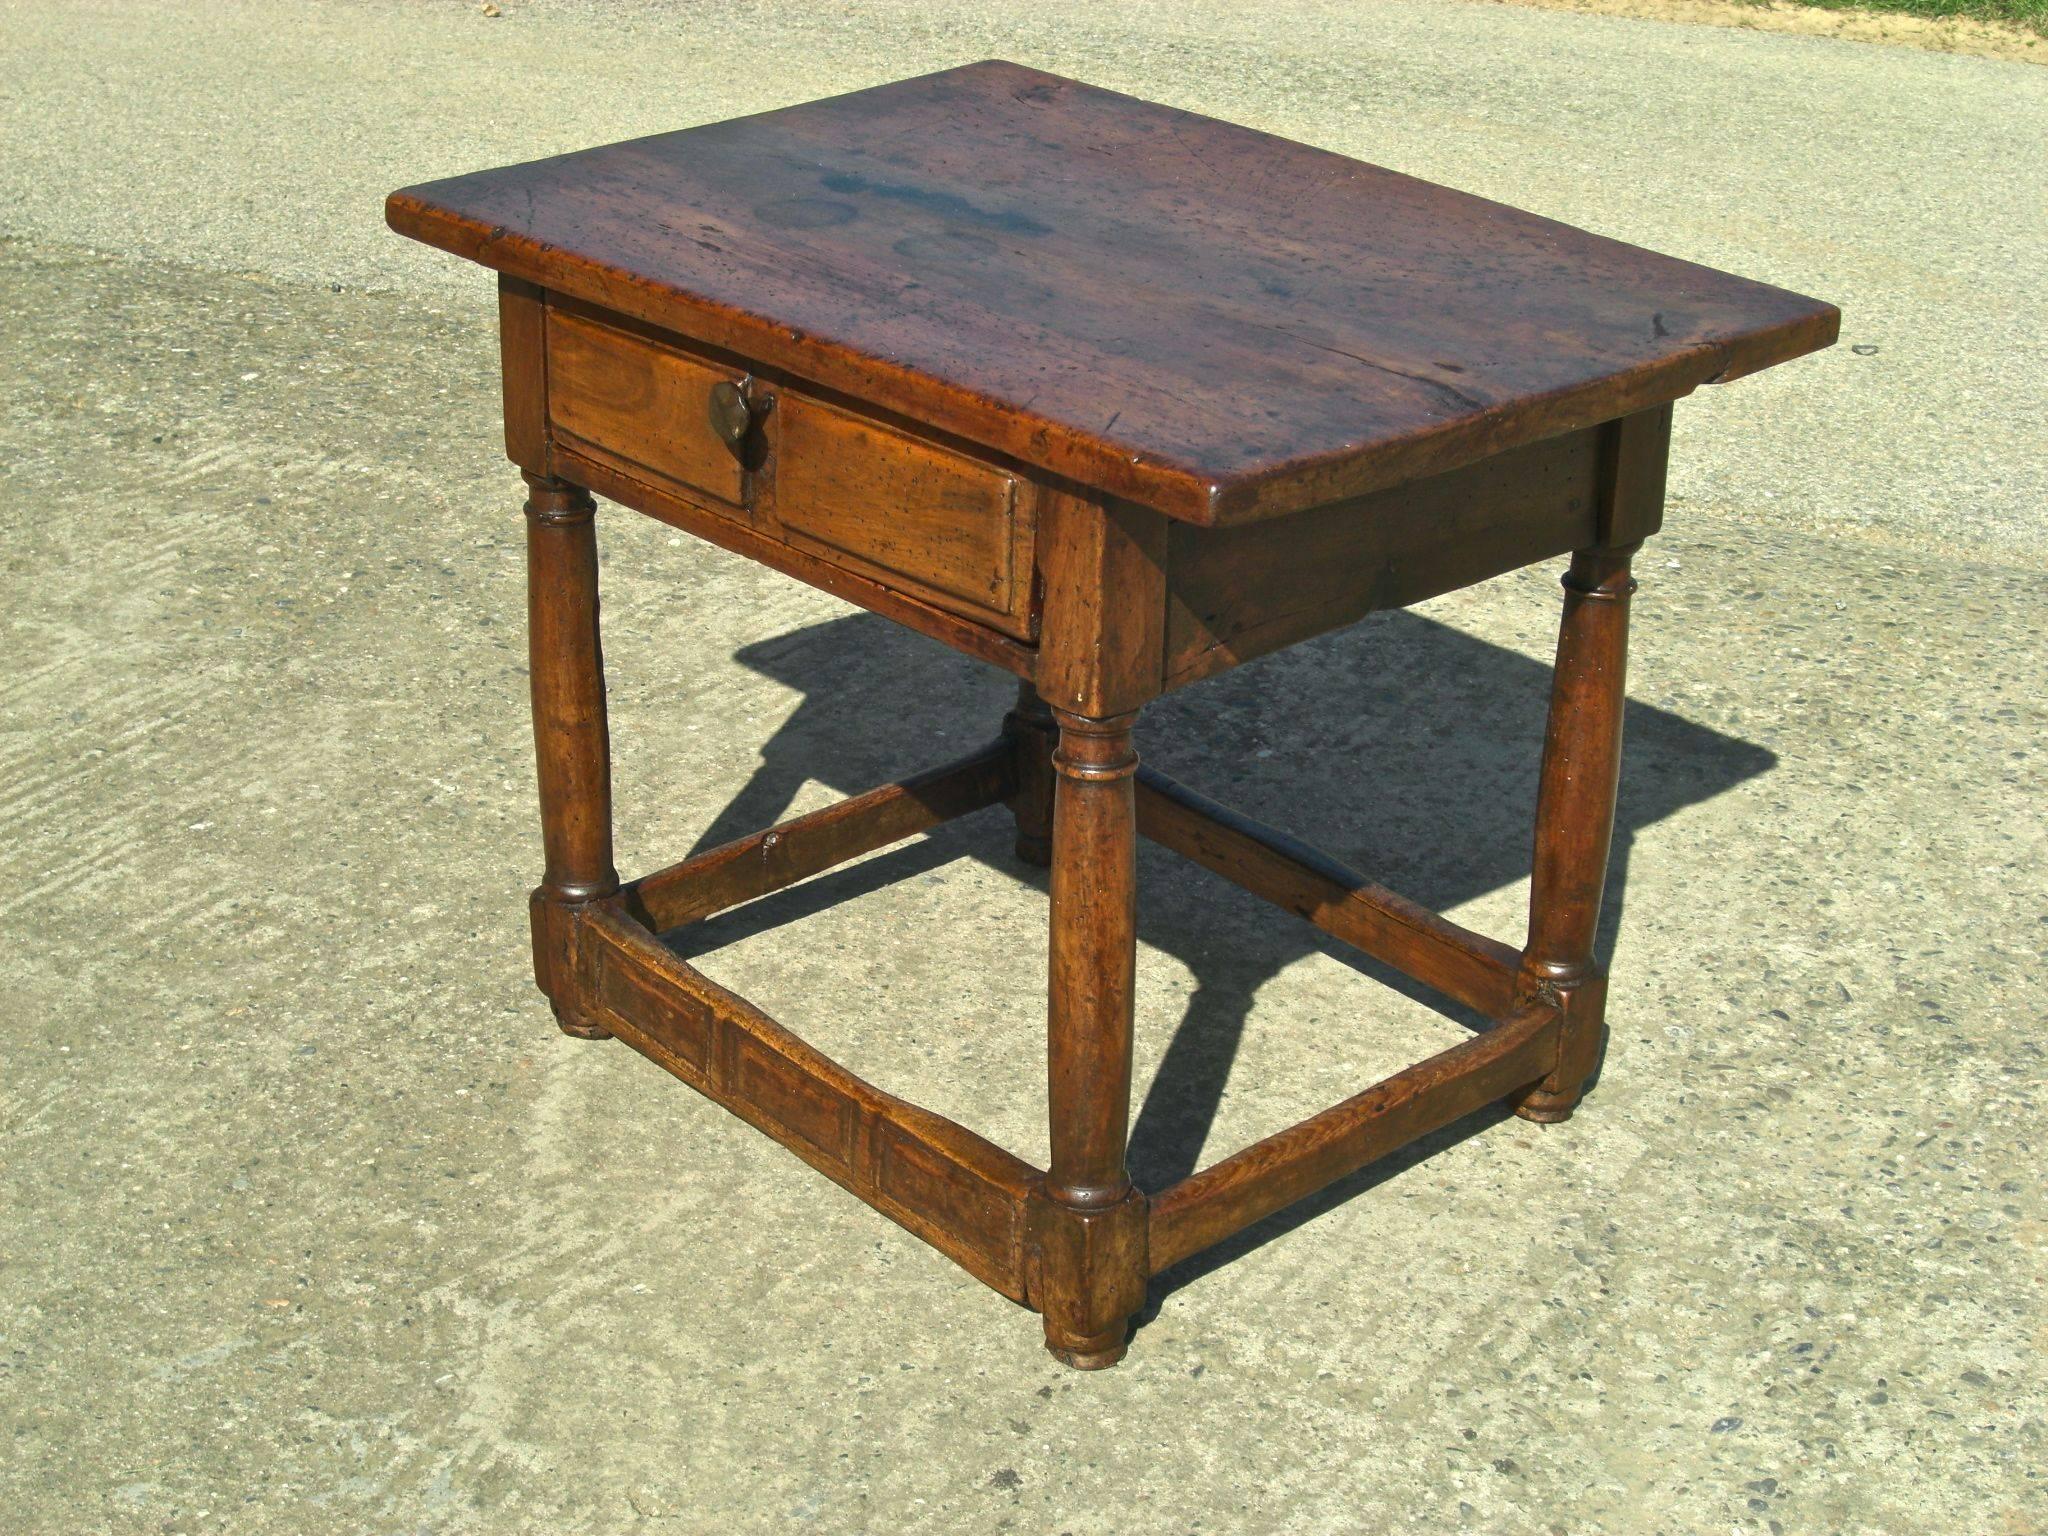 This small early to mid-17th century single board walnut table was found in the province of Palencia in Old Castile, Spain.

One of the most underpopulated and least known of all the Spanish provinces, Palencia was home to the production of some